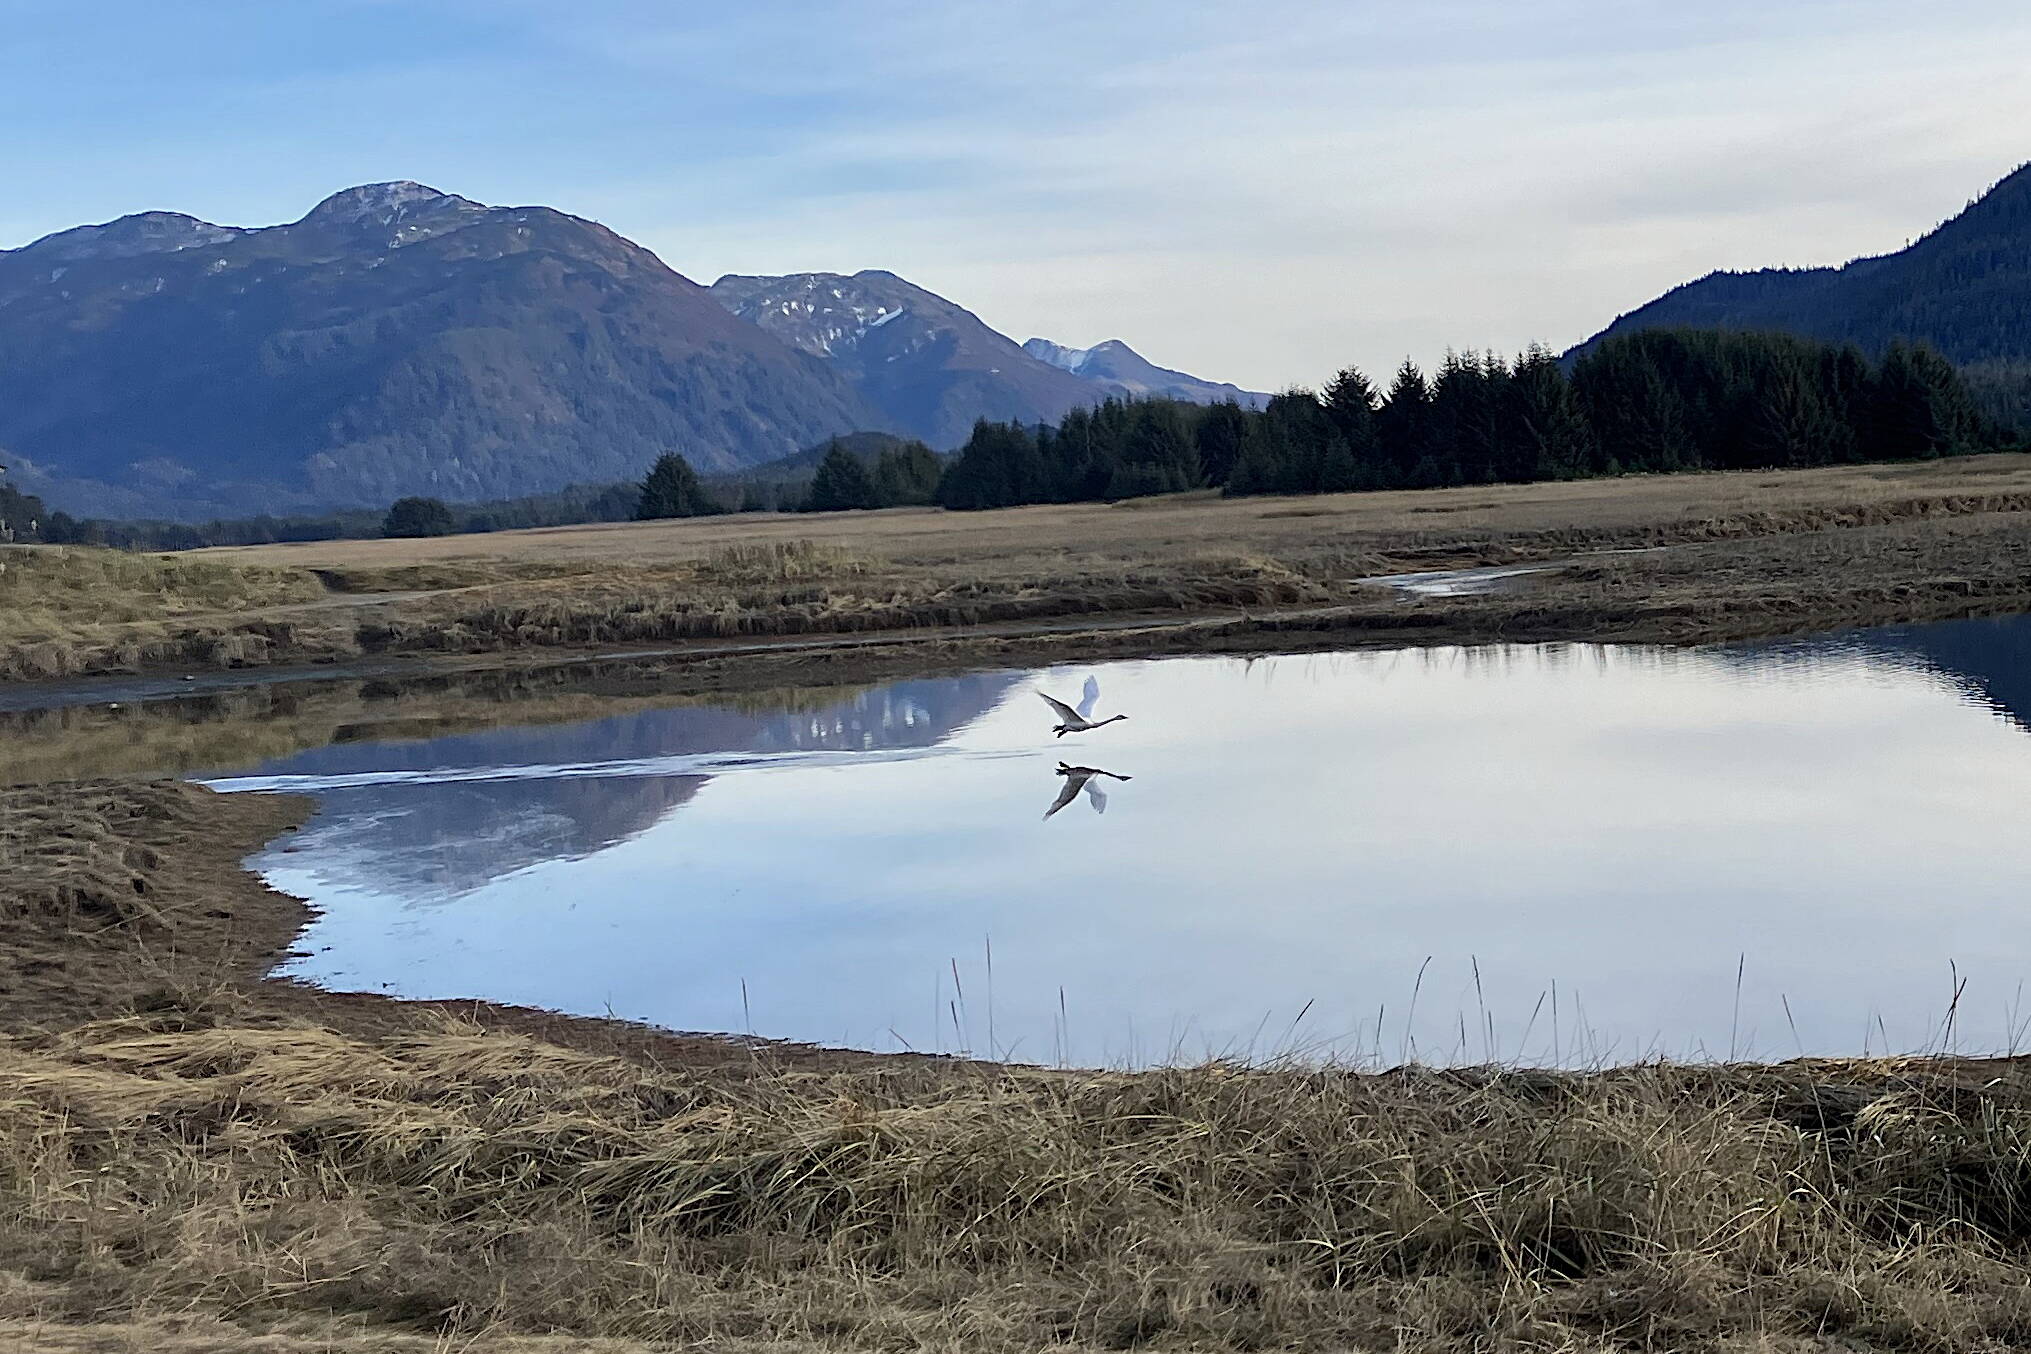 A swan and its reflection in the water shortly after takeoff near the Airport Dike Trail on Nov 3. (Photo by Tony Sholty)